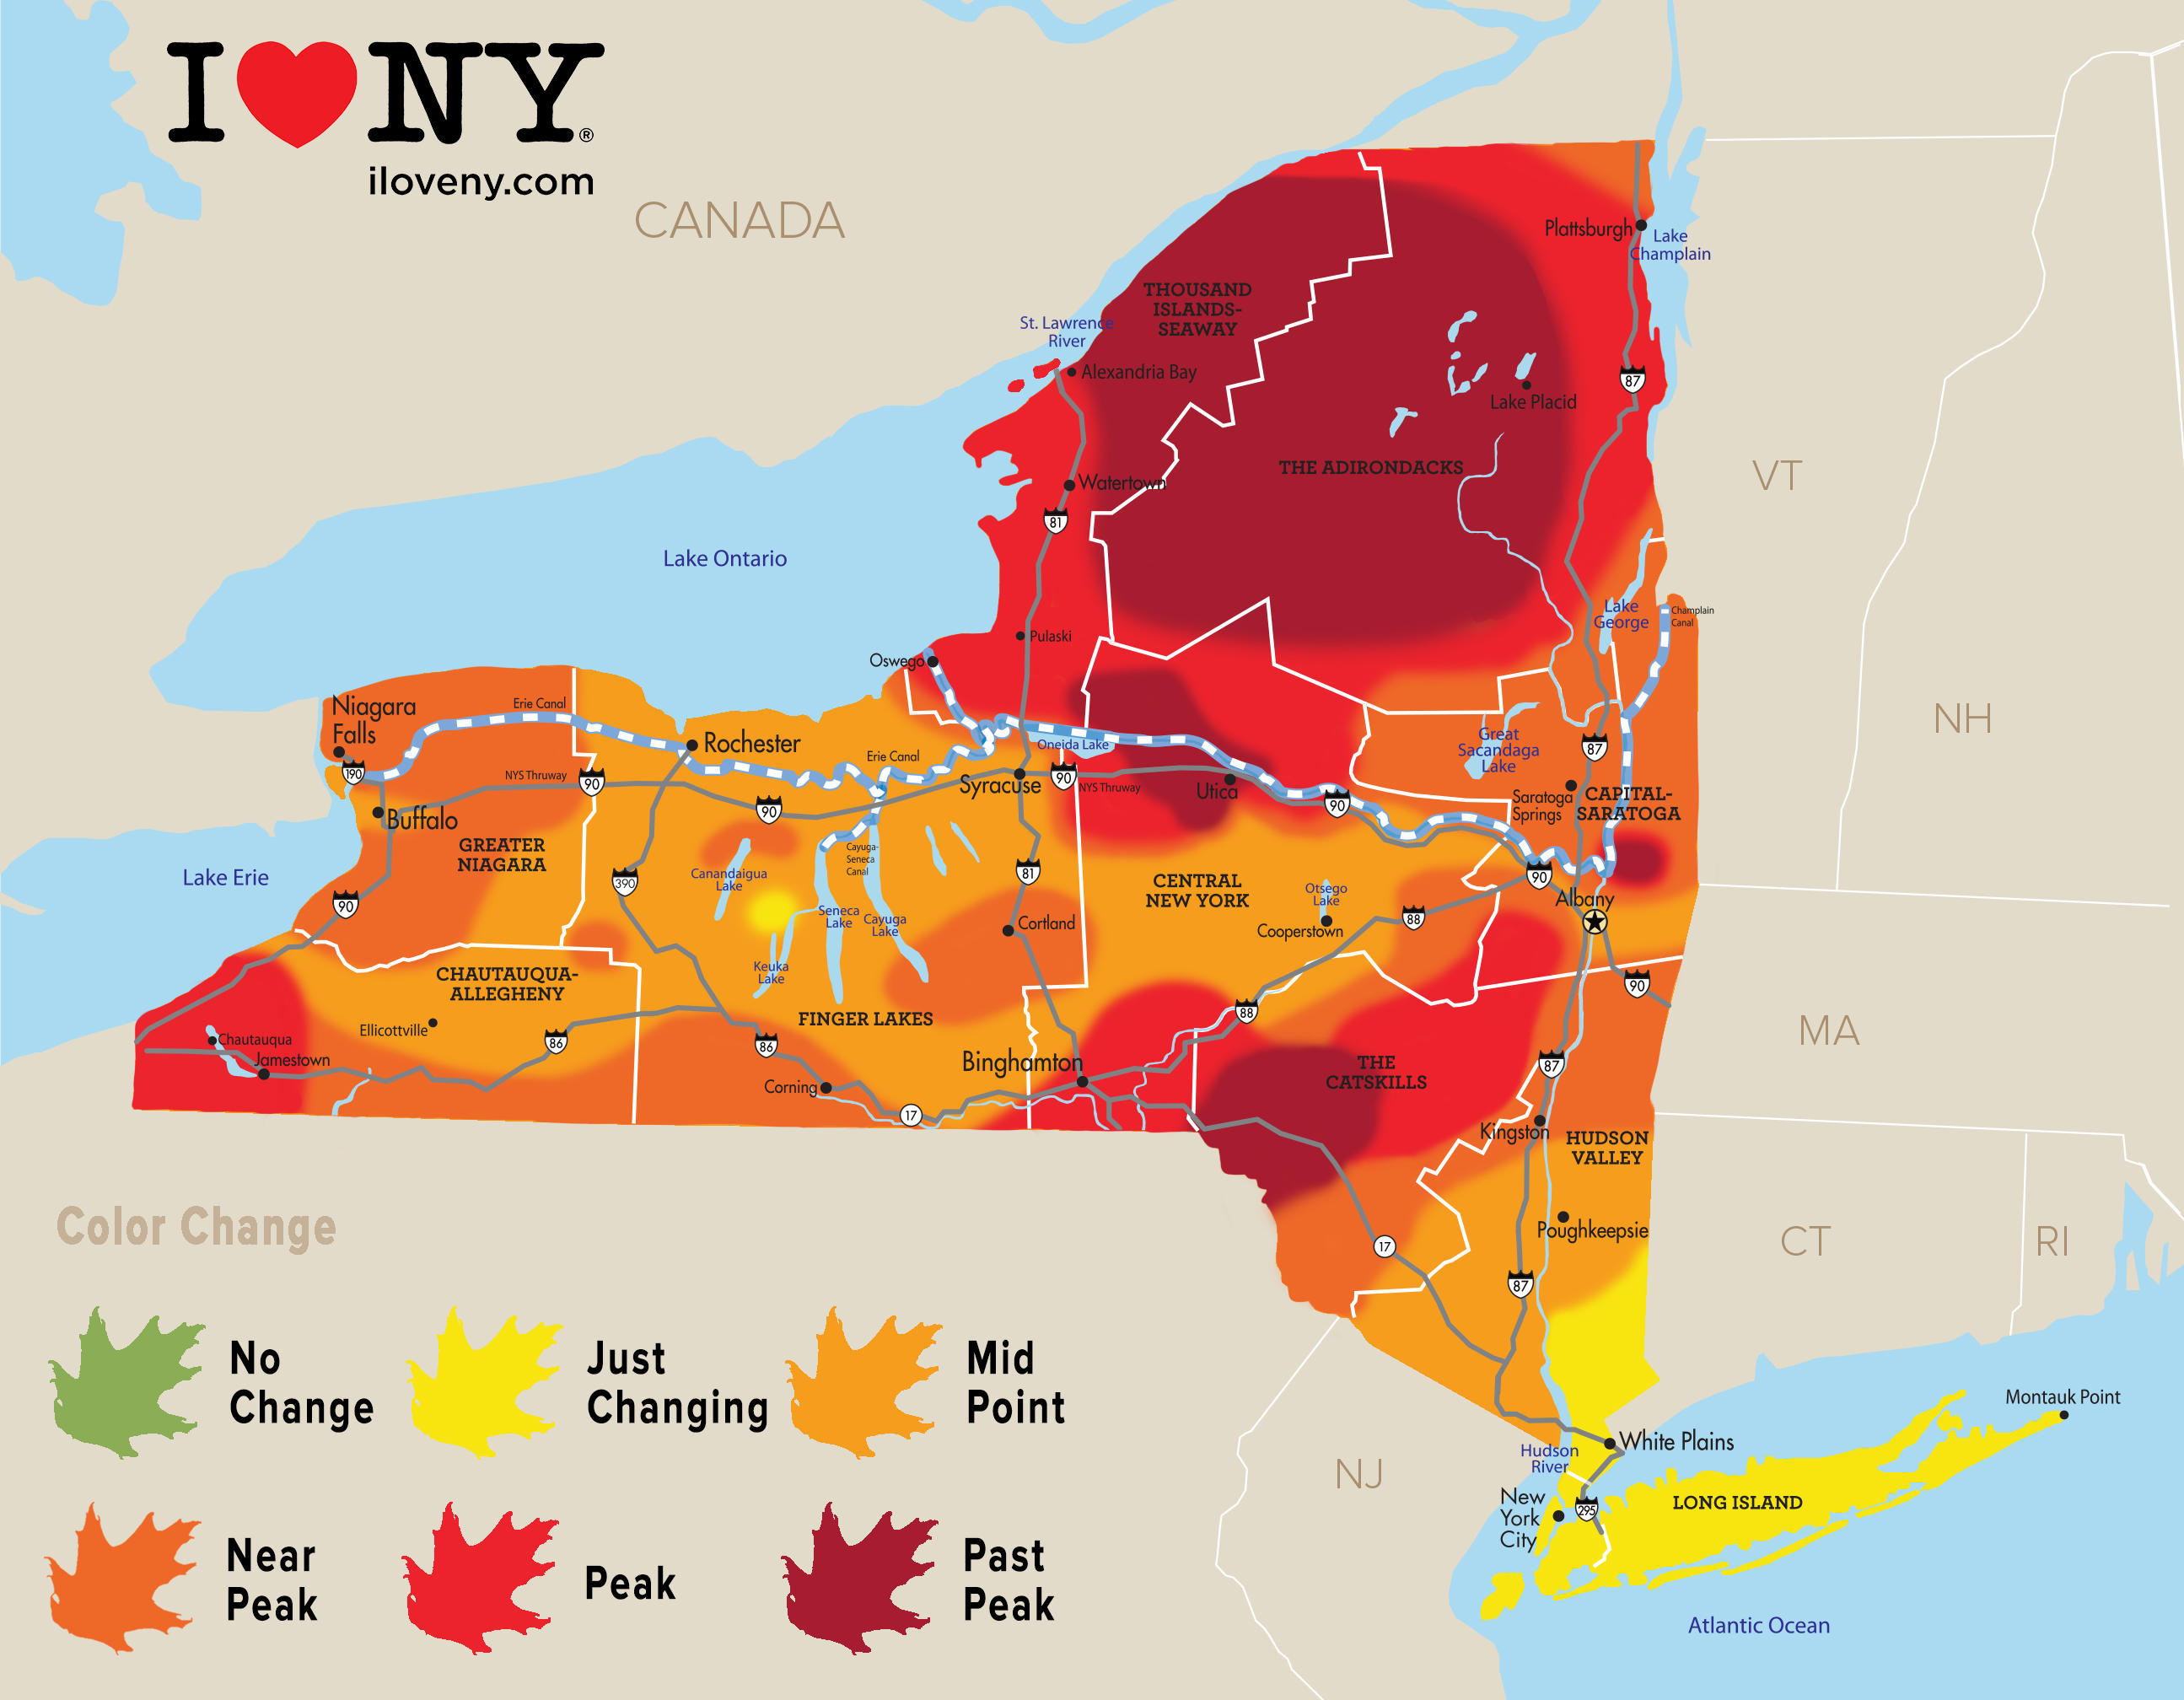 Upstate NY fall foliage Peak colors abound in several regions